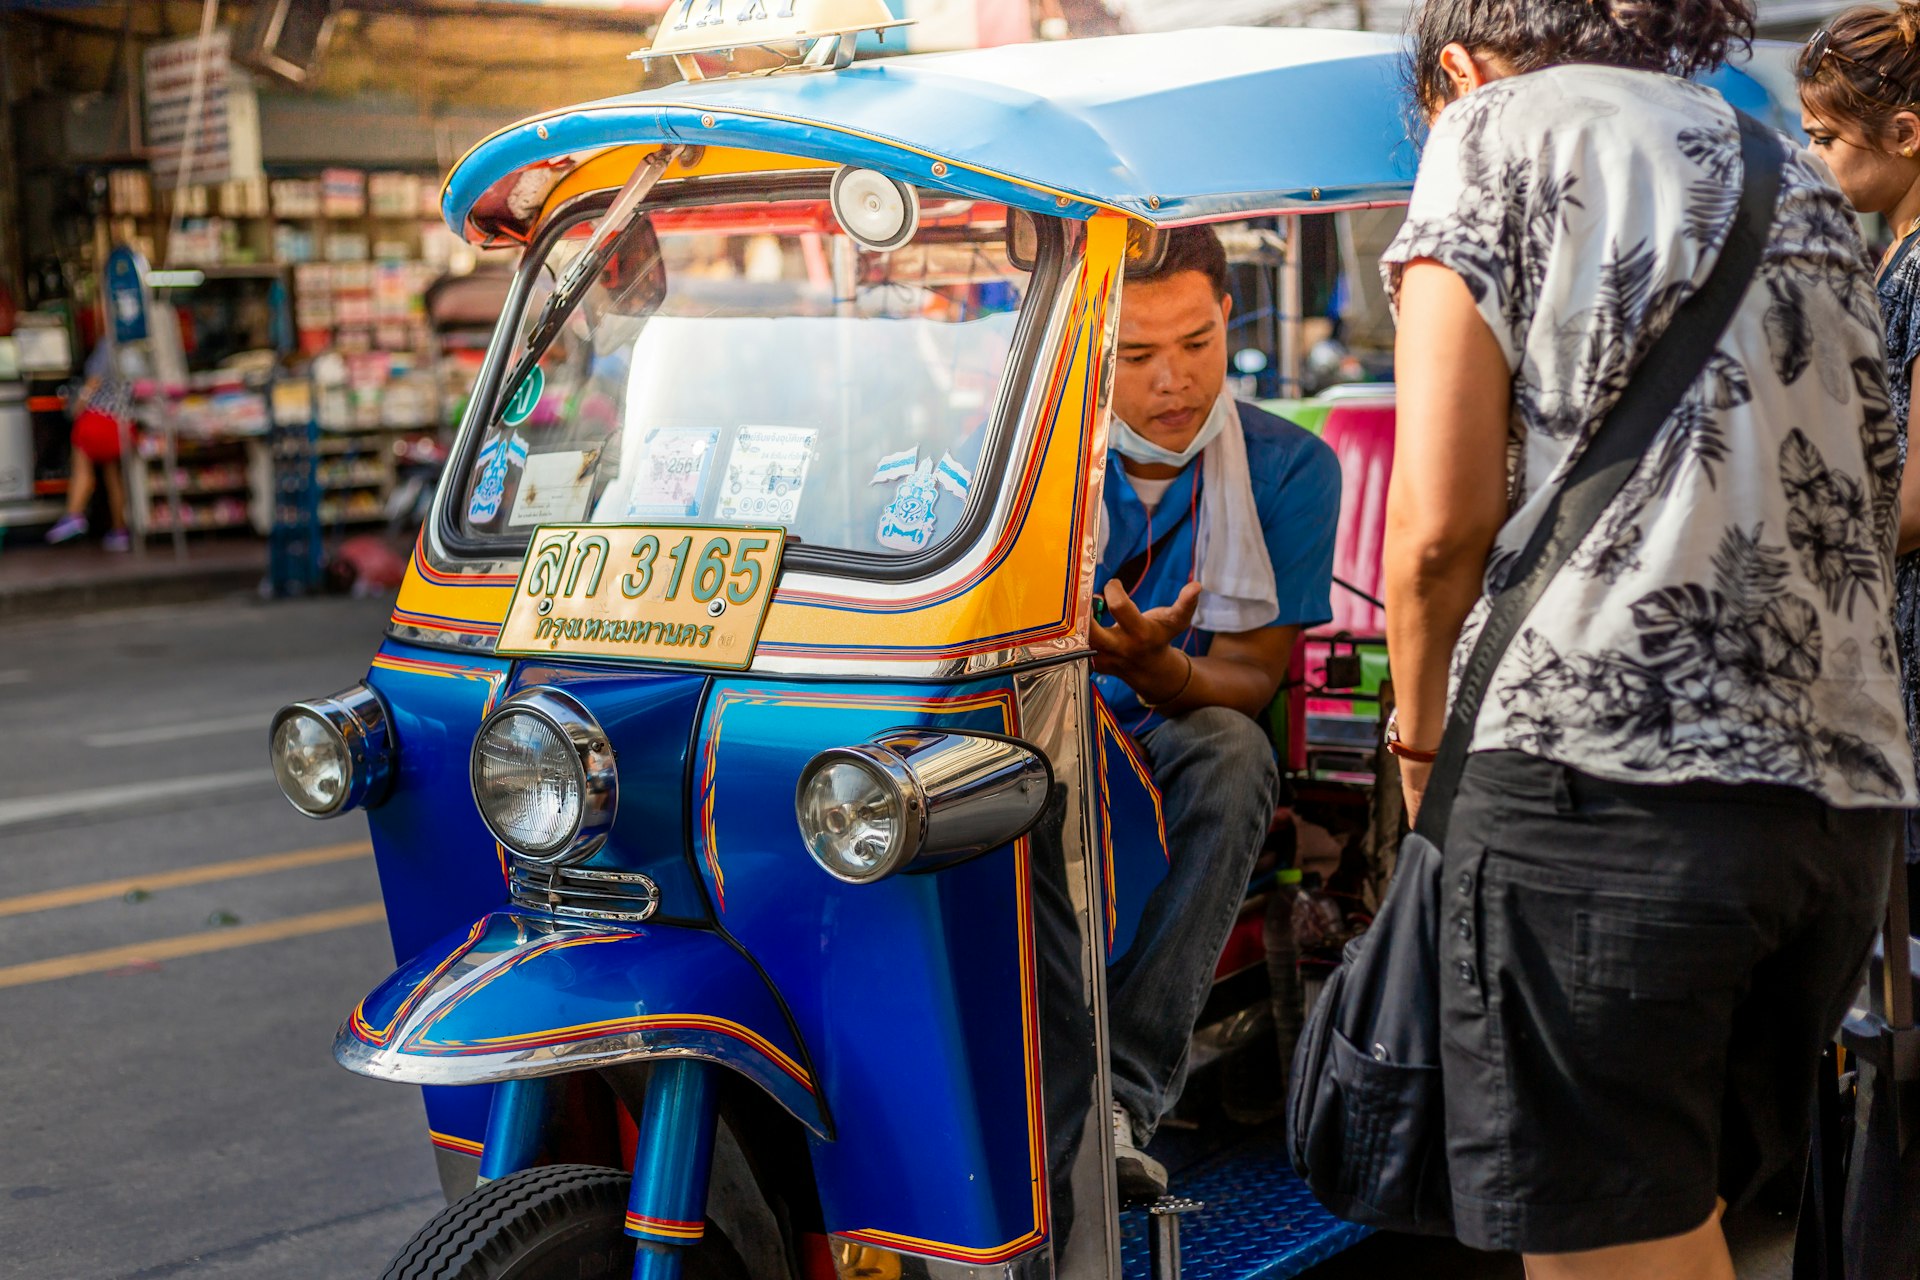 A driver in a blue and white tuk-tuk, picking up a passenger